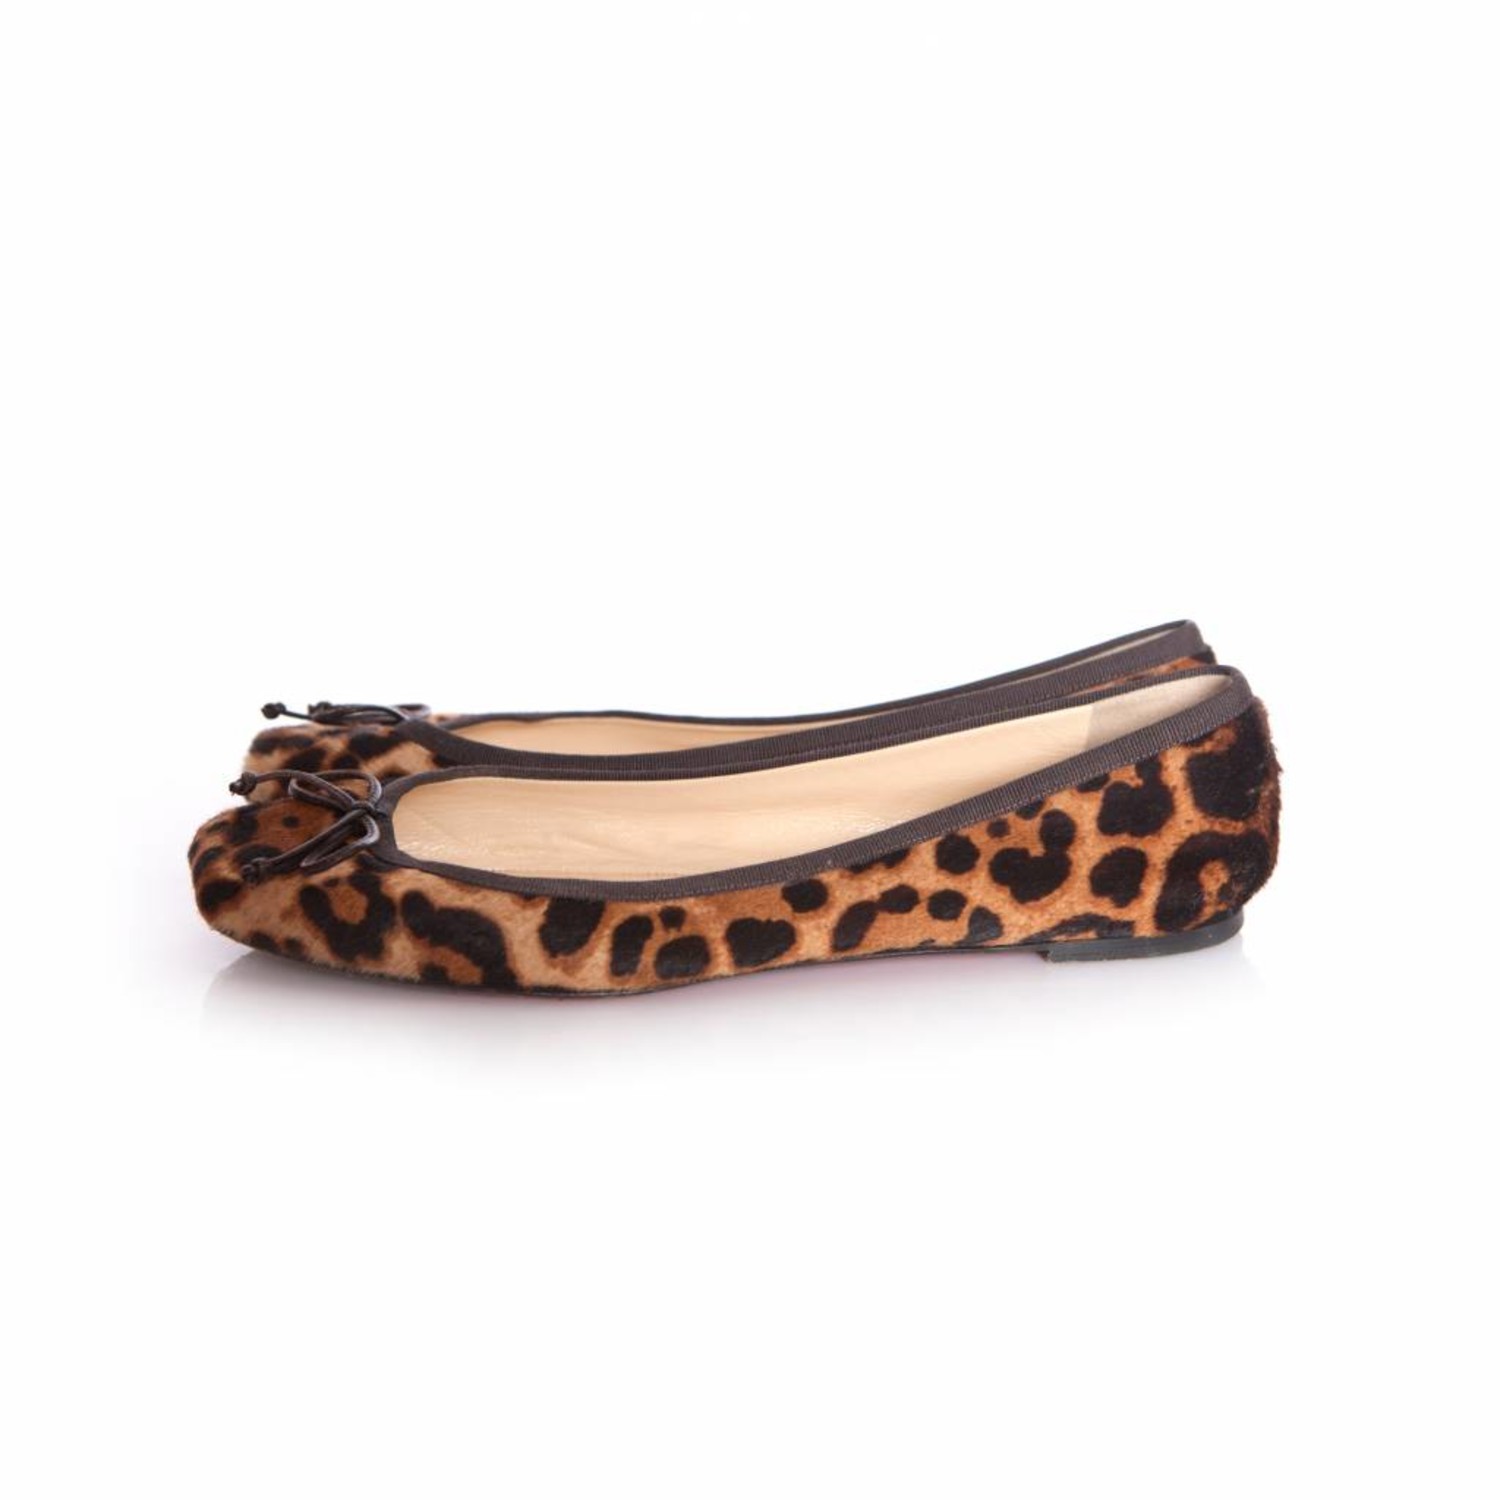 Christian Louboutin, leopard printed in size 39.5. - Unique